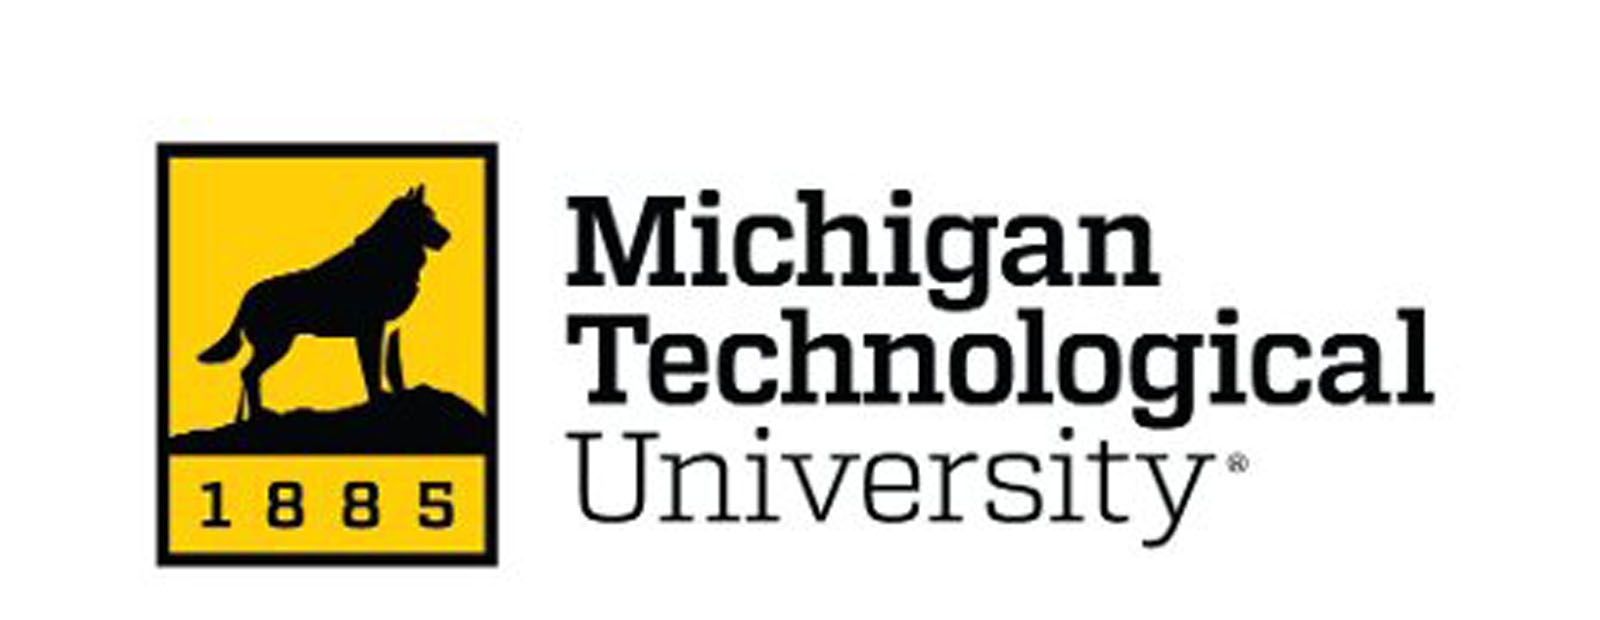 There's a new logo at MTU.